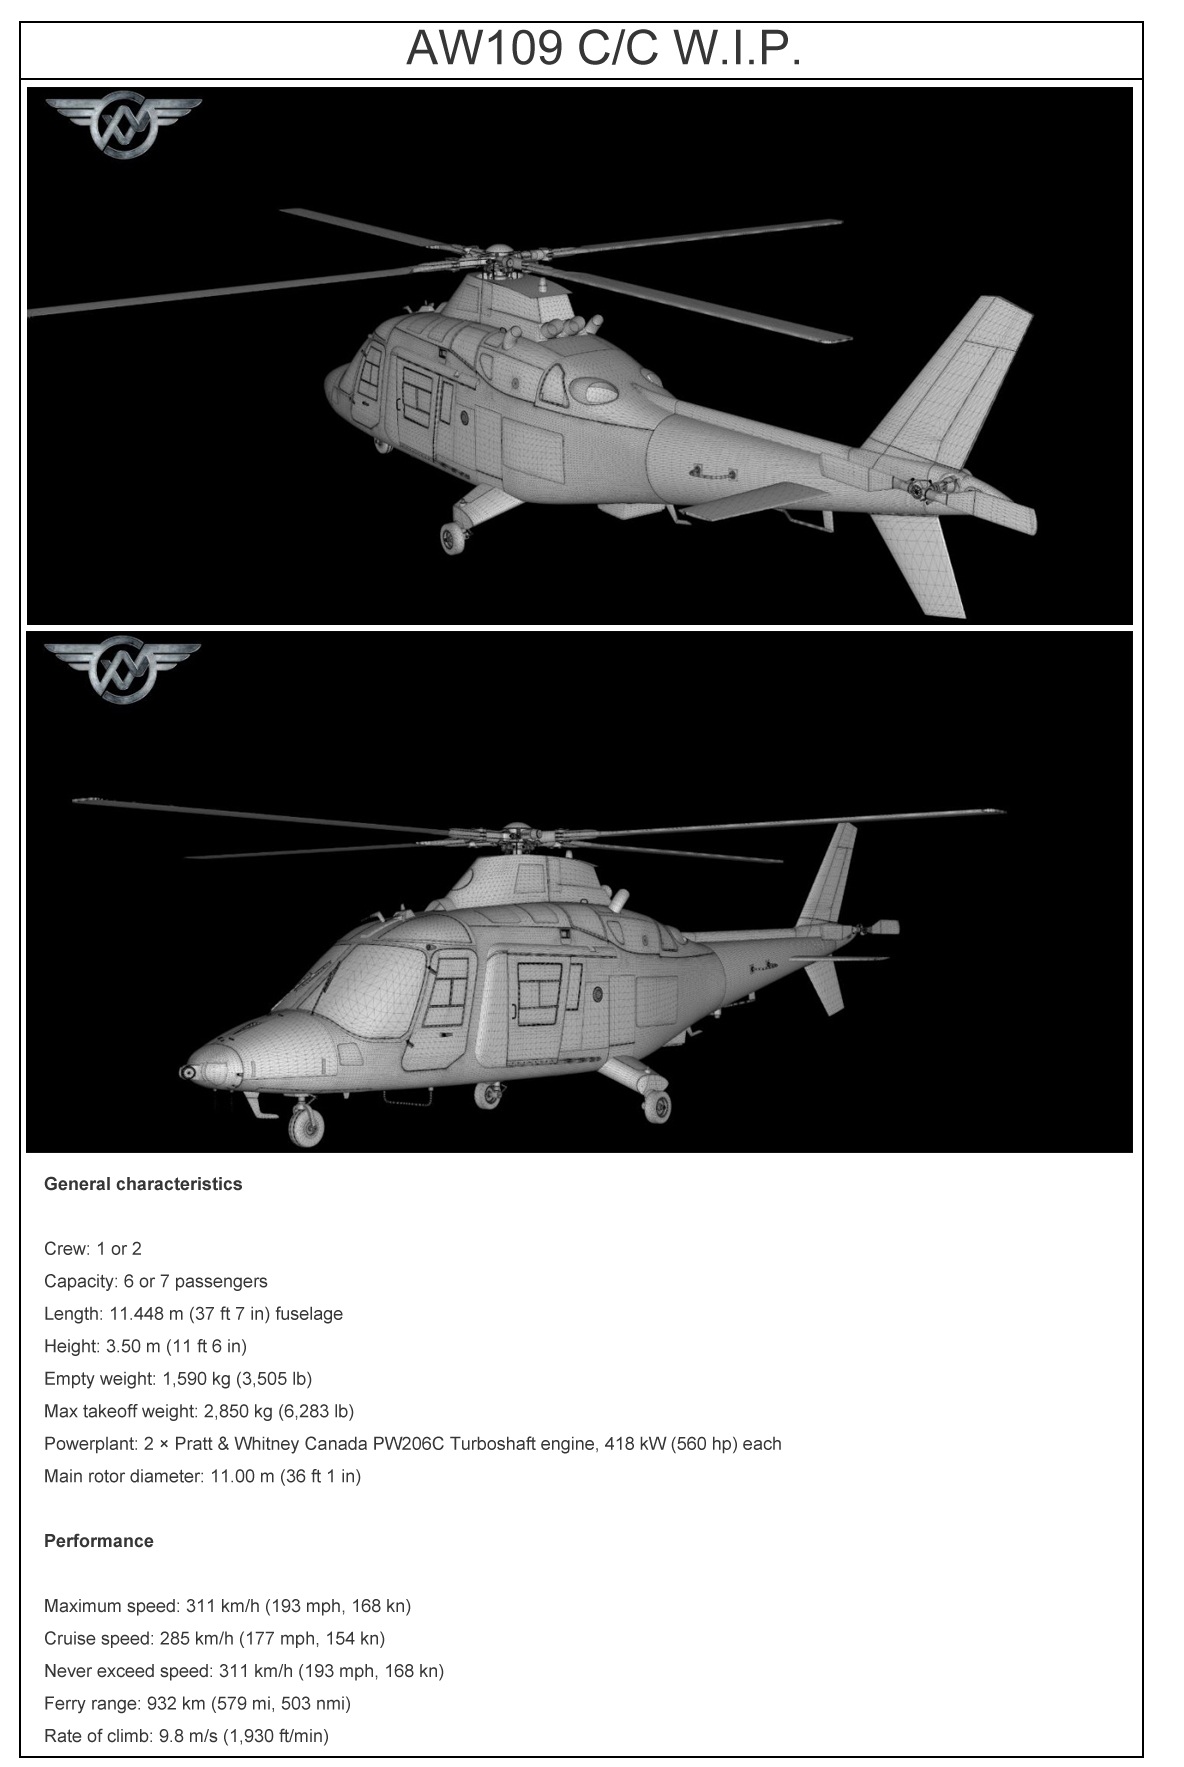 S_AVES_AW109WIP